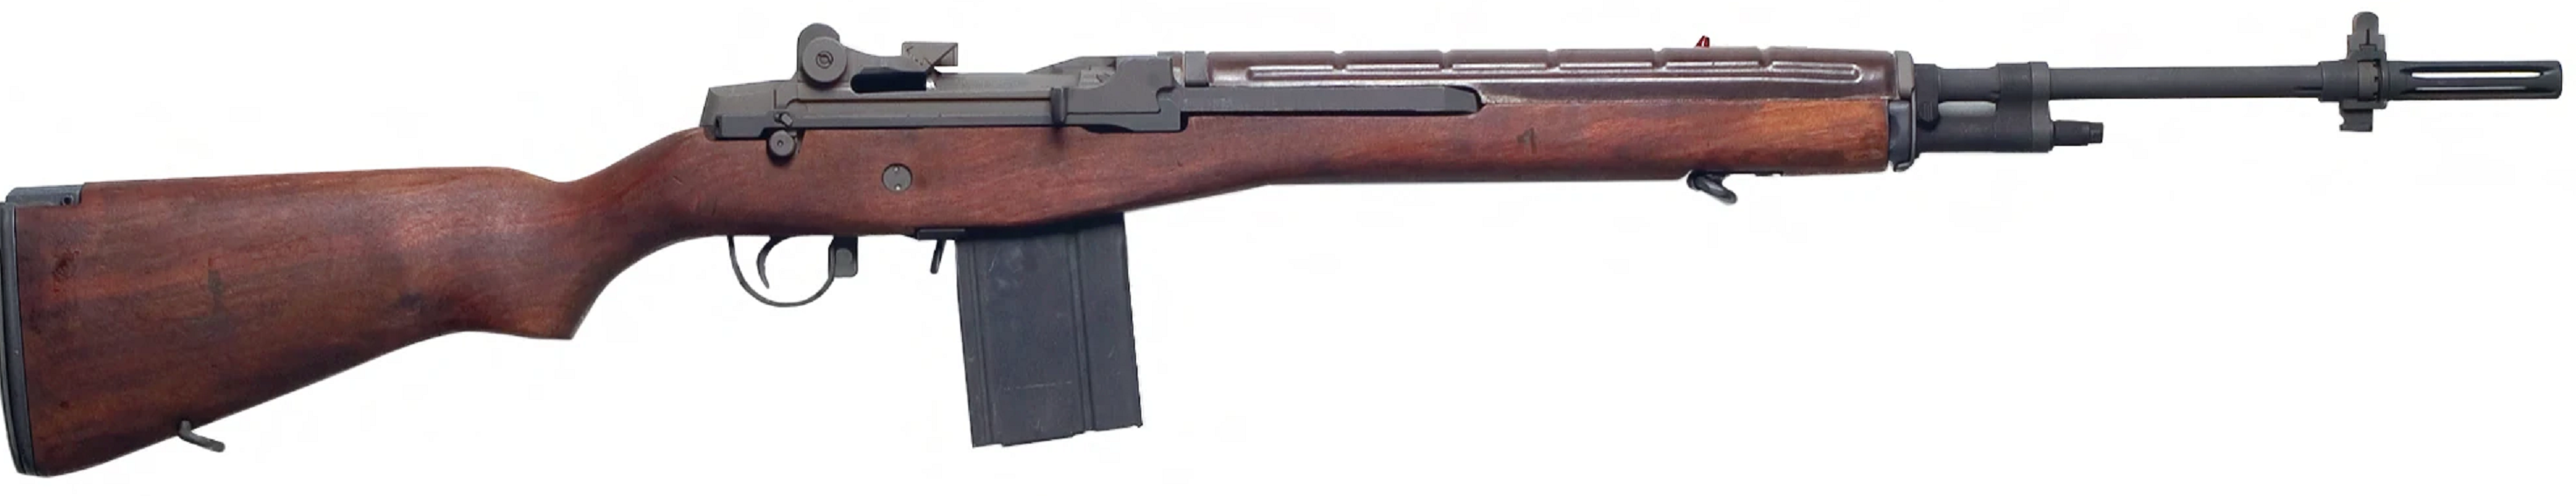 M14_rifle.png